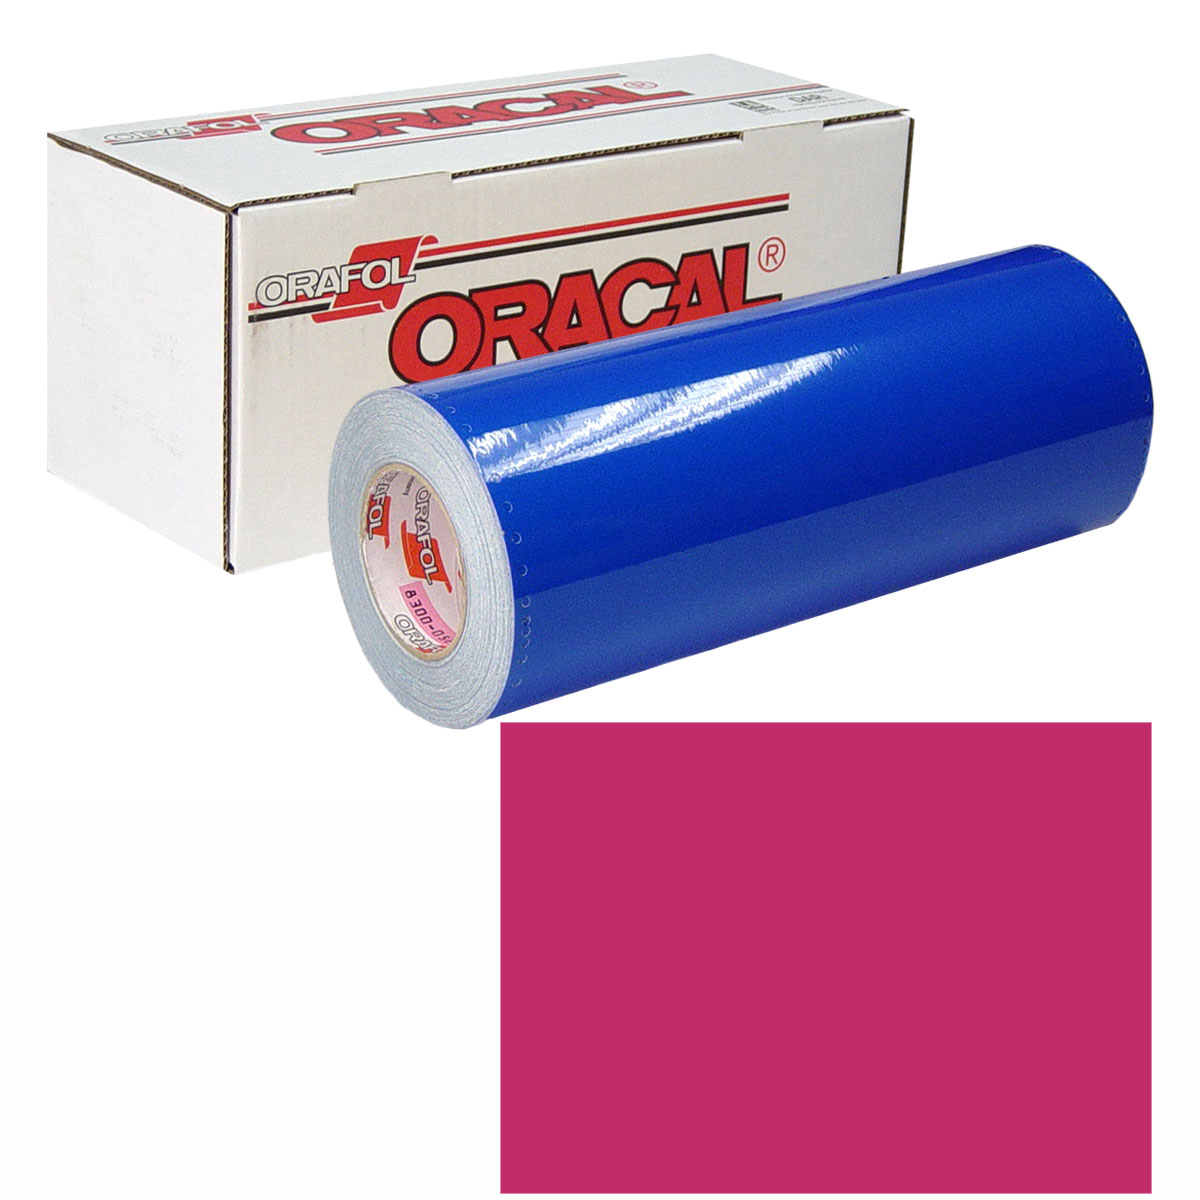 ORACAL 631 15in X 50yd 041 Pink